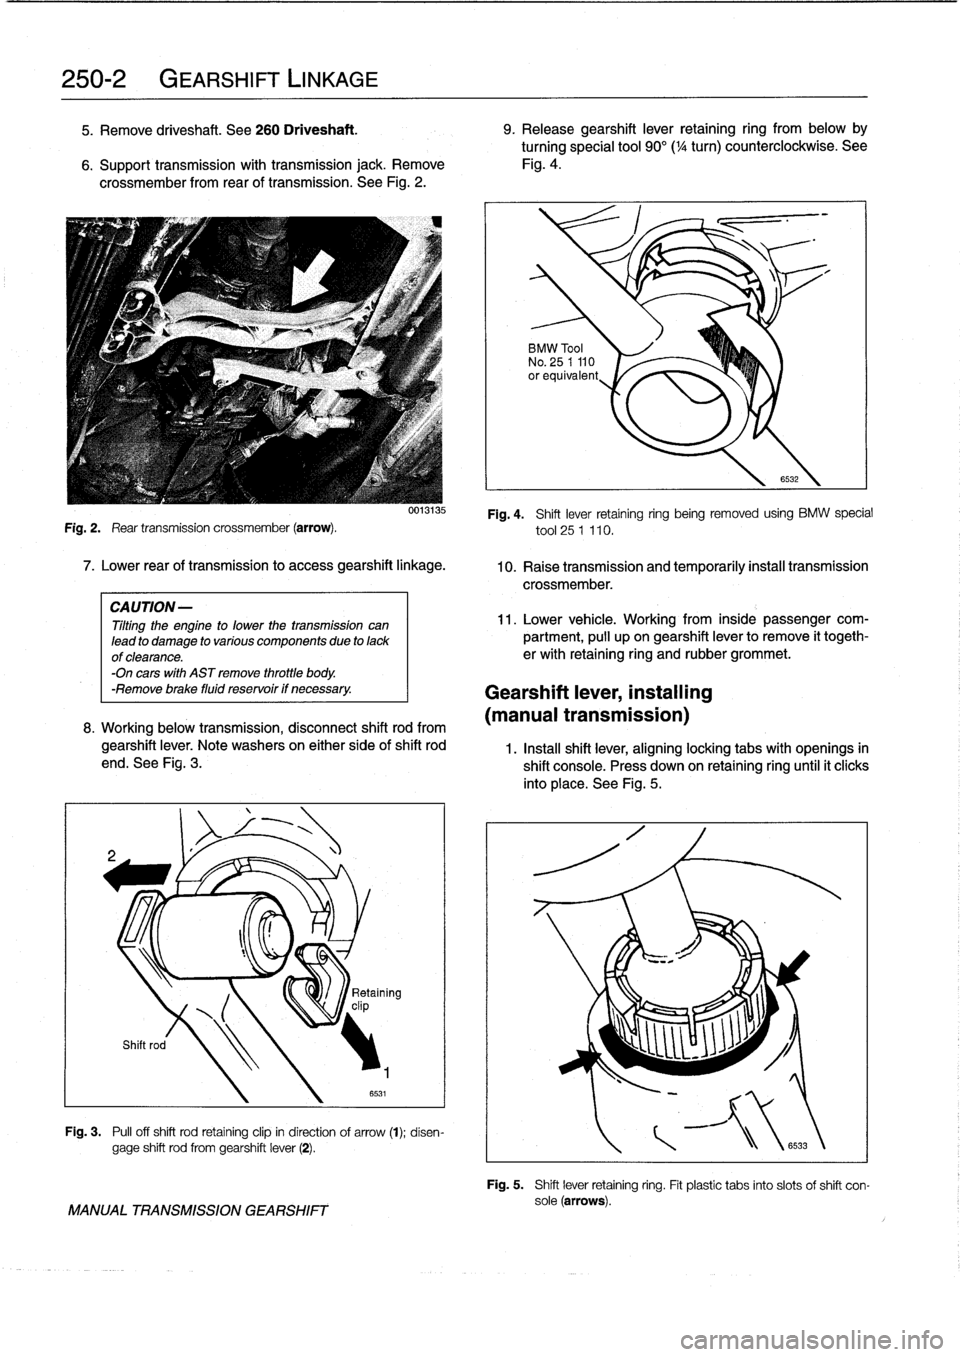 BMW 328i 1994 E36 Owners Manual 
250-2

	

GEARSHIFT
LINKAGE

5
.
Remove
driveshaft
.
See260
Driveshaft
.

	

9
.
Release
gearshift
lever
retaining
ring
from
below
by

turningspecial
tool
90°(
1
/4
turn)
counterclockwise
.
See

6
.